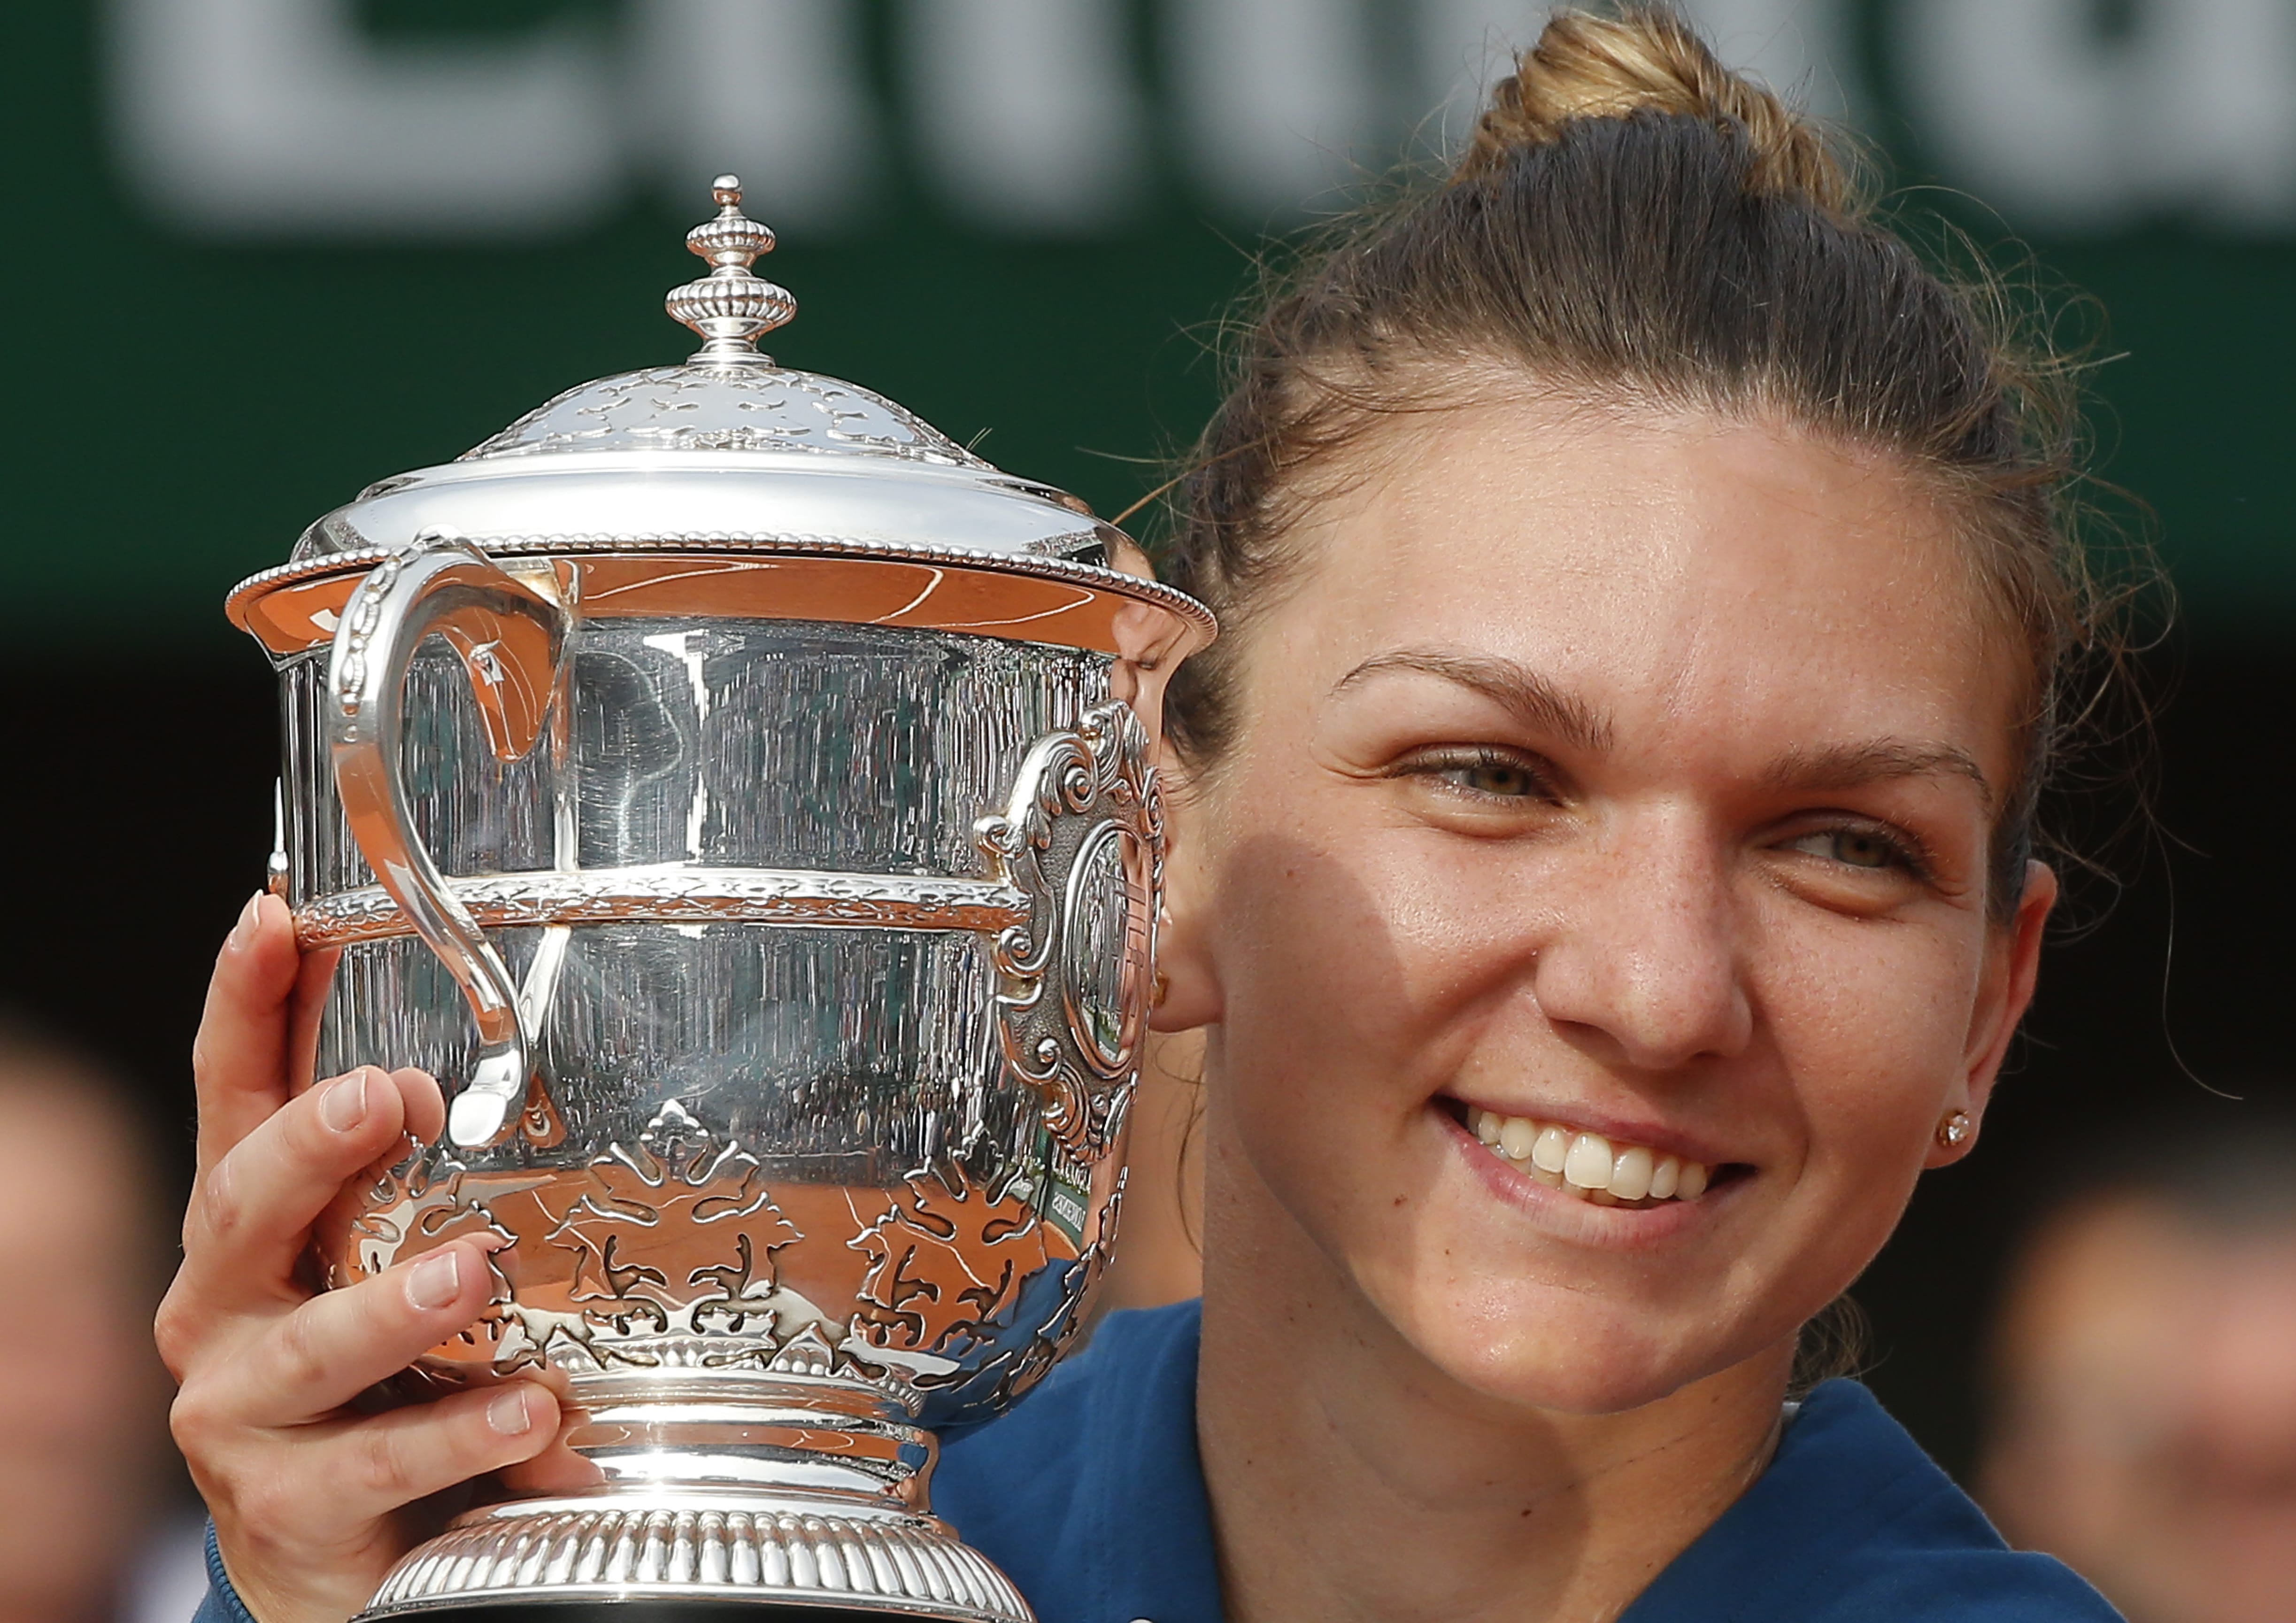 Romania's Simona Halep holds the trophy as she celebrates winning the final match of the French Open tennis tournament against Sloane Stephens of the U.S. in three sets 3-6, 6-4, 6-1, at the Roland Garros stadium in Paris, France, Saturday, June 9, 2018.